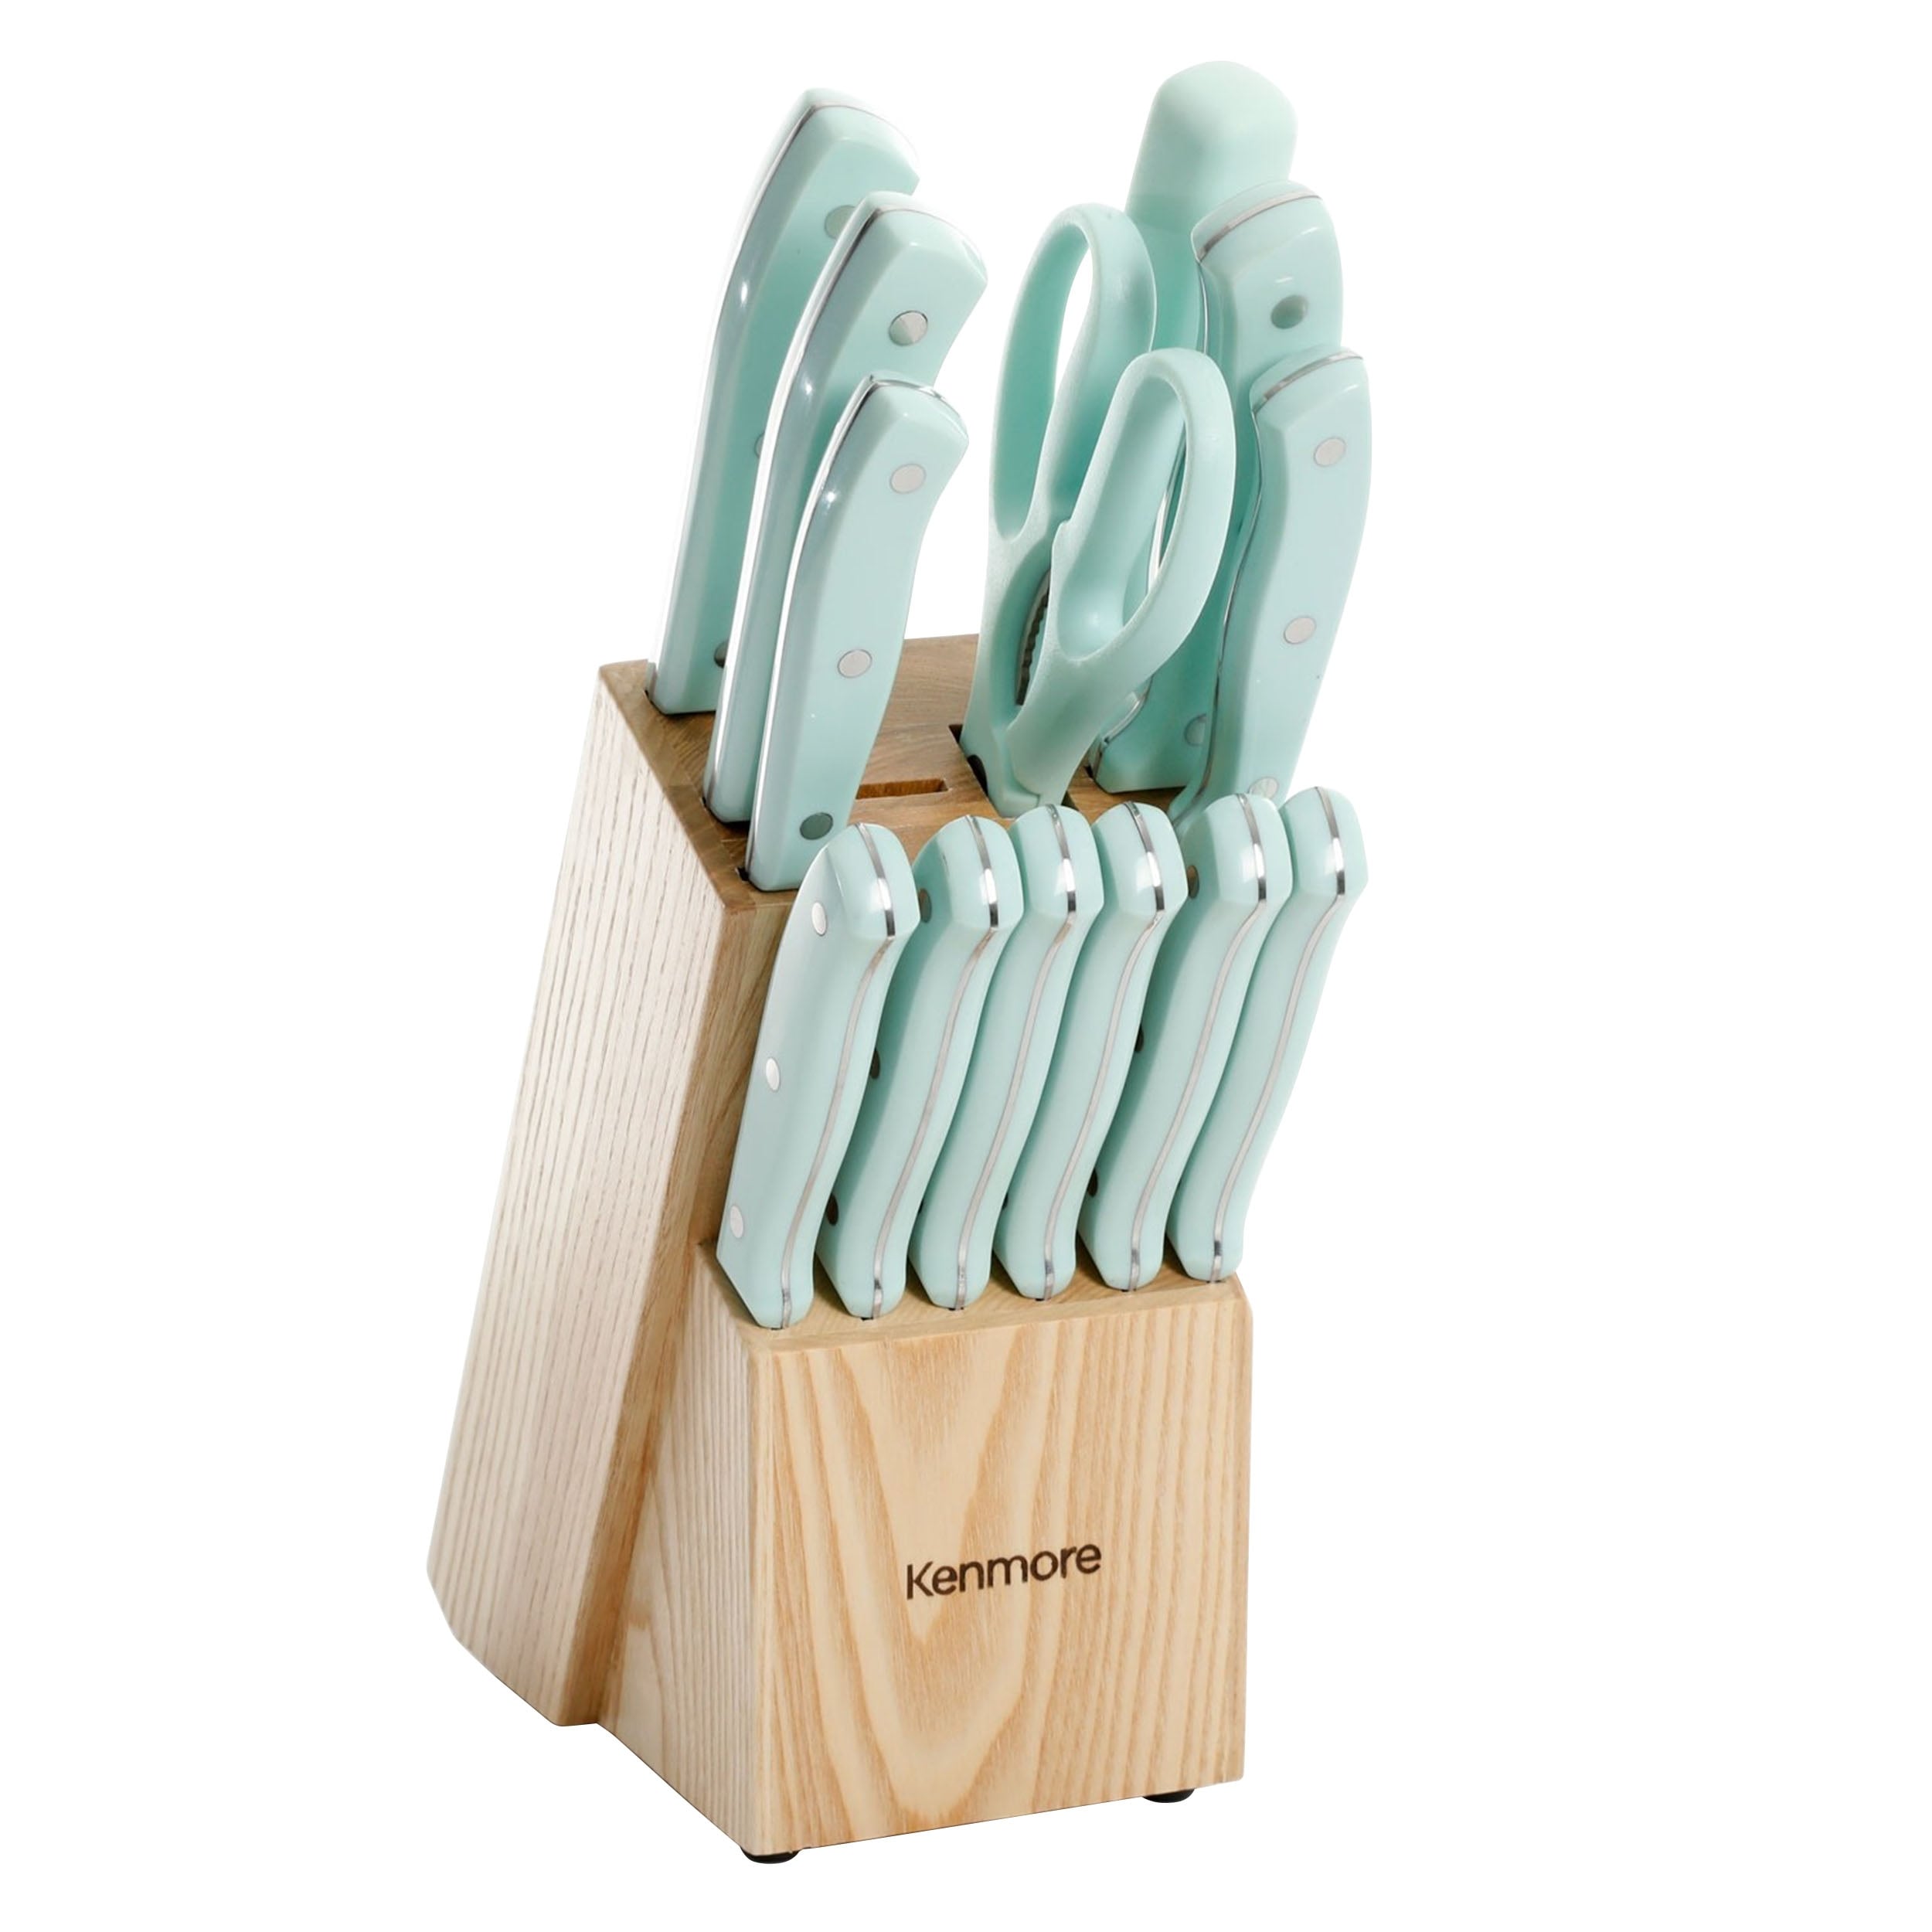 https://ak1.ostkcdn.com/images/products/is/images/direct/302bd5d20e33fa88d9967bdf1f6e57f3b622b0f4/Kenmore-Kane-14Pc-Stainless-Steel-Knife-Set-Glacier-Blue-w--Wood-Block.jpg